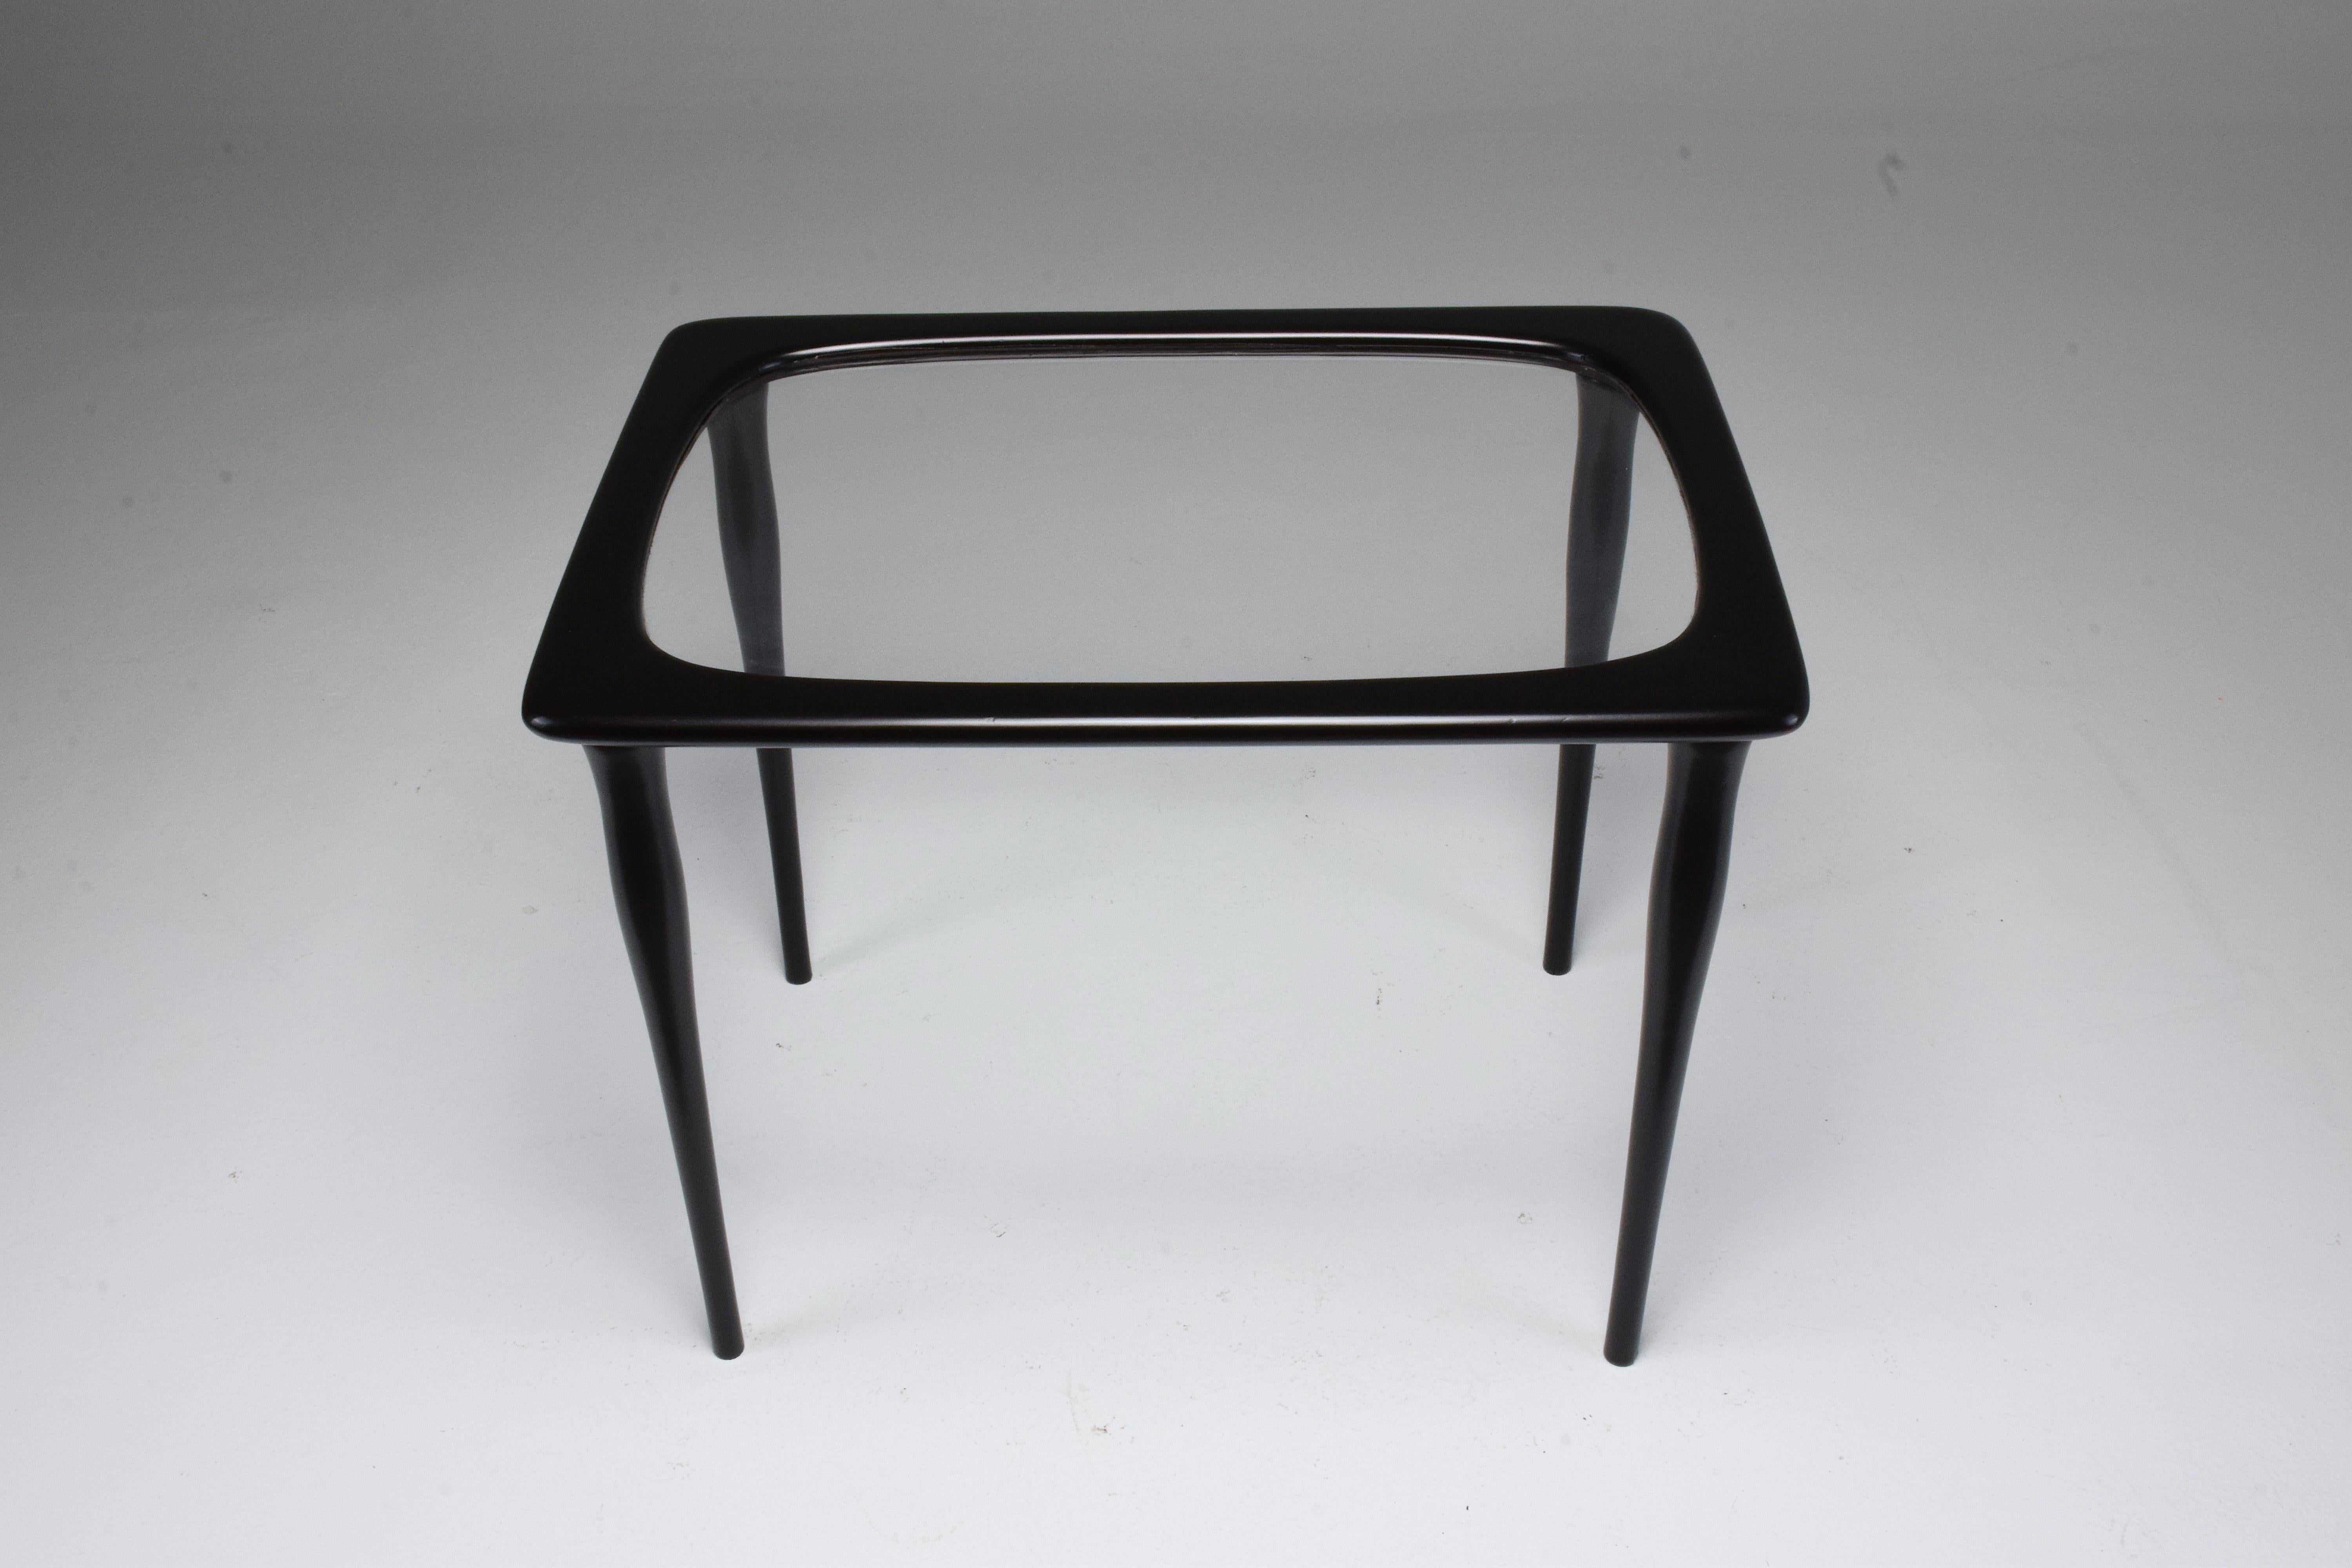 Three Italian Midcentury Nesting Tables by Ico Parisi, 1950s For Sale 6